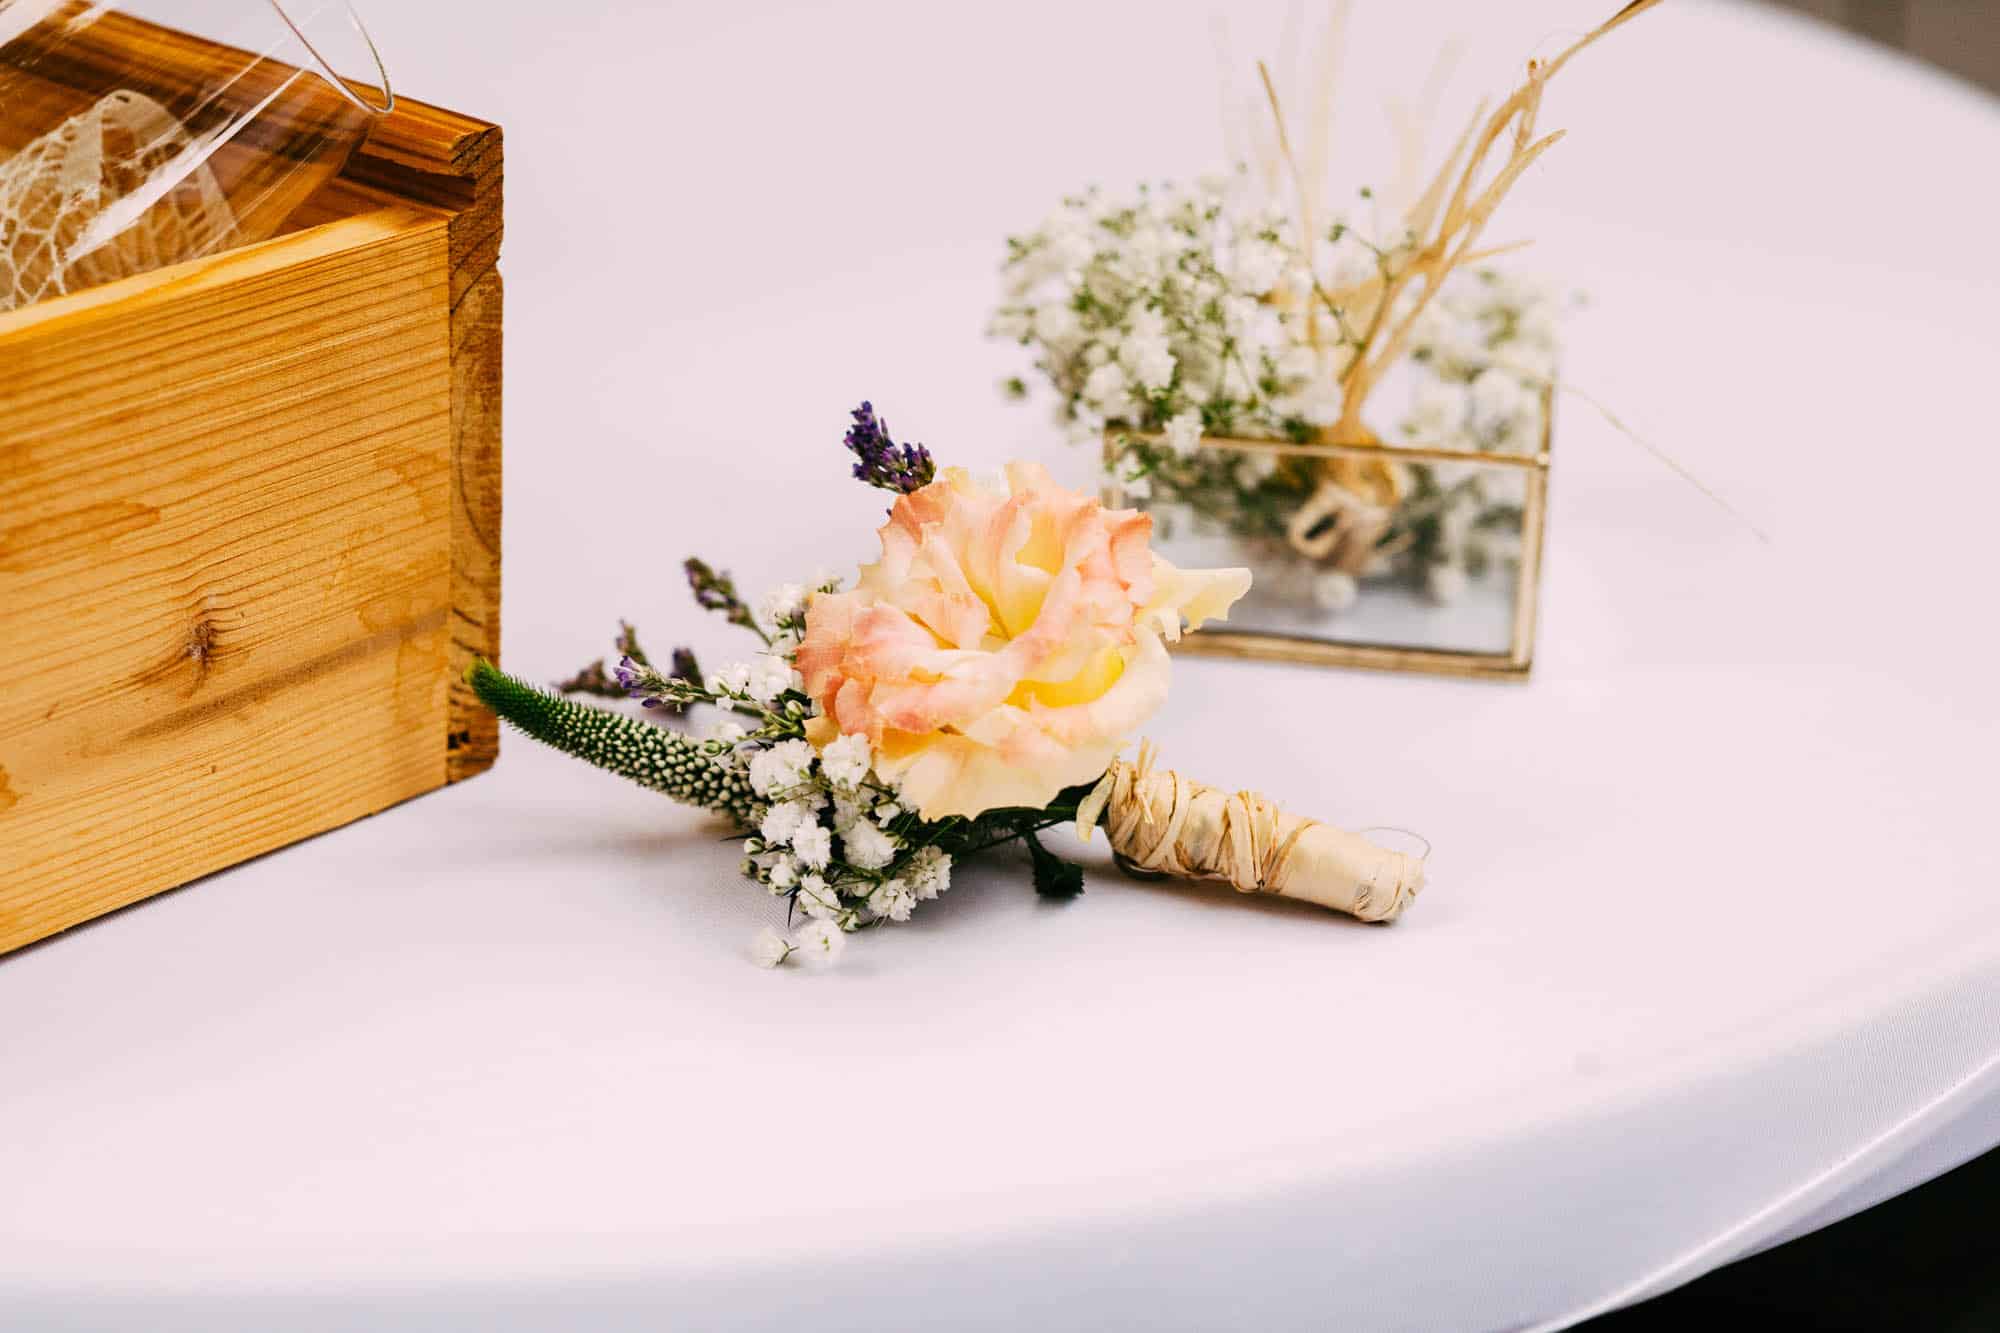 Corsage next to wedding rings and wooden box.